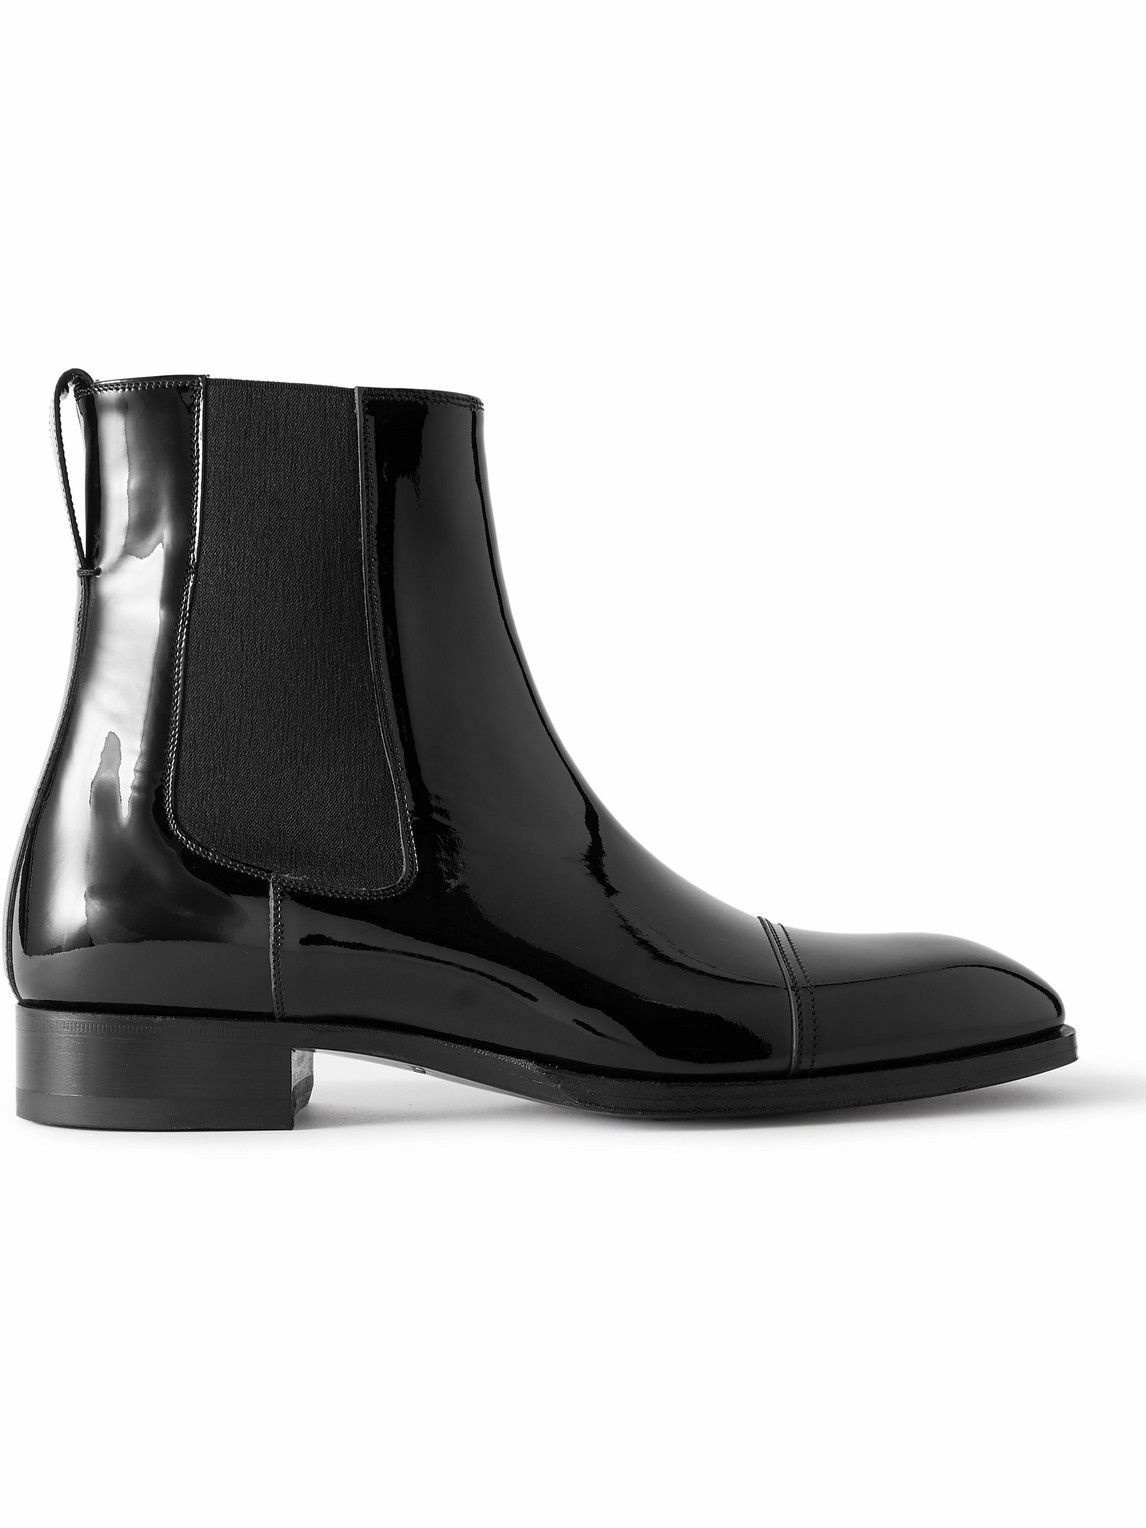 TOM FORD - Patent-Leather Chelsea Boots - Black TOM FORD